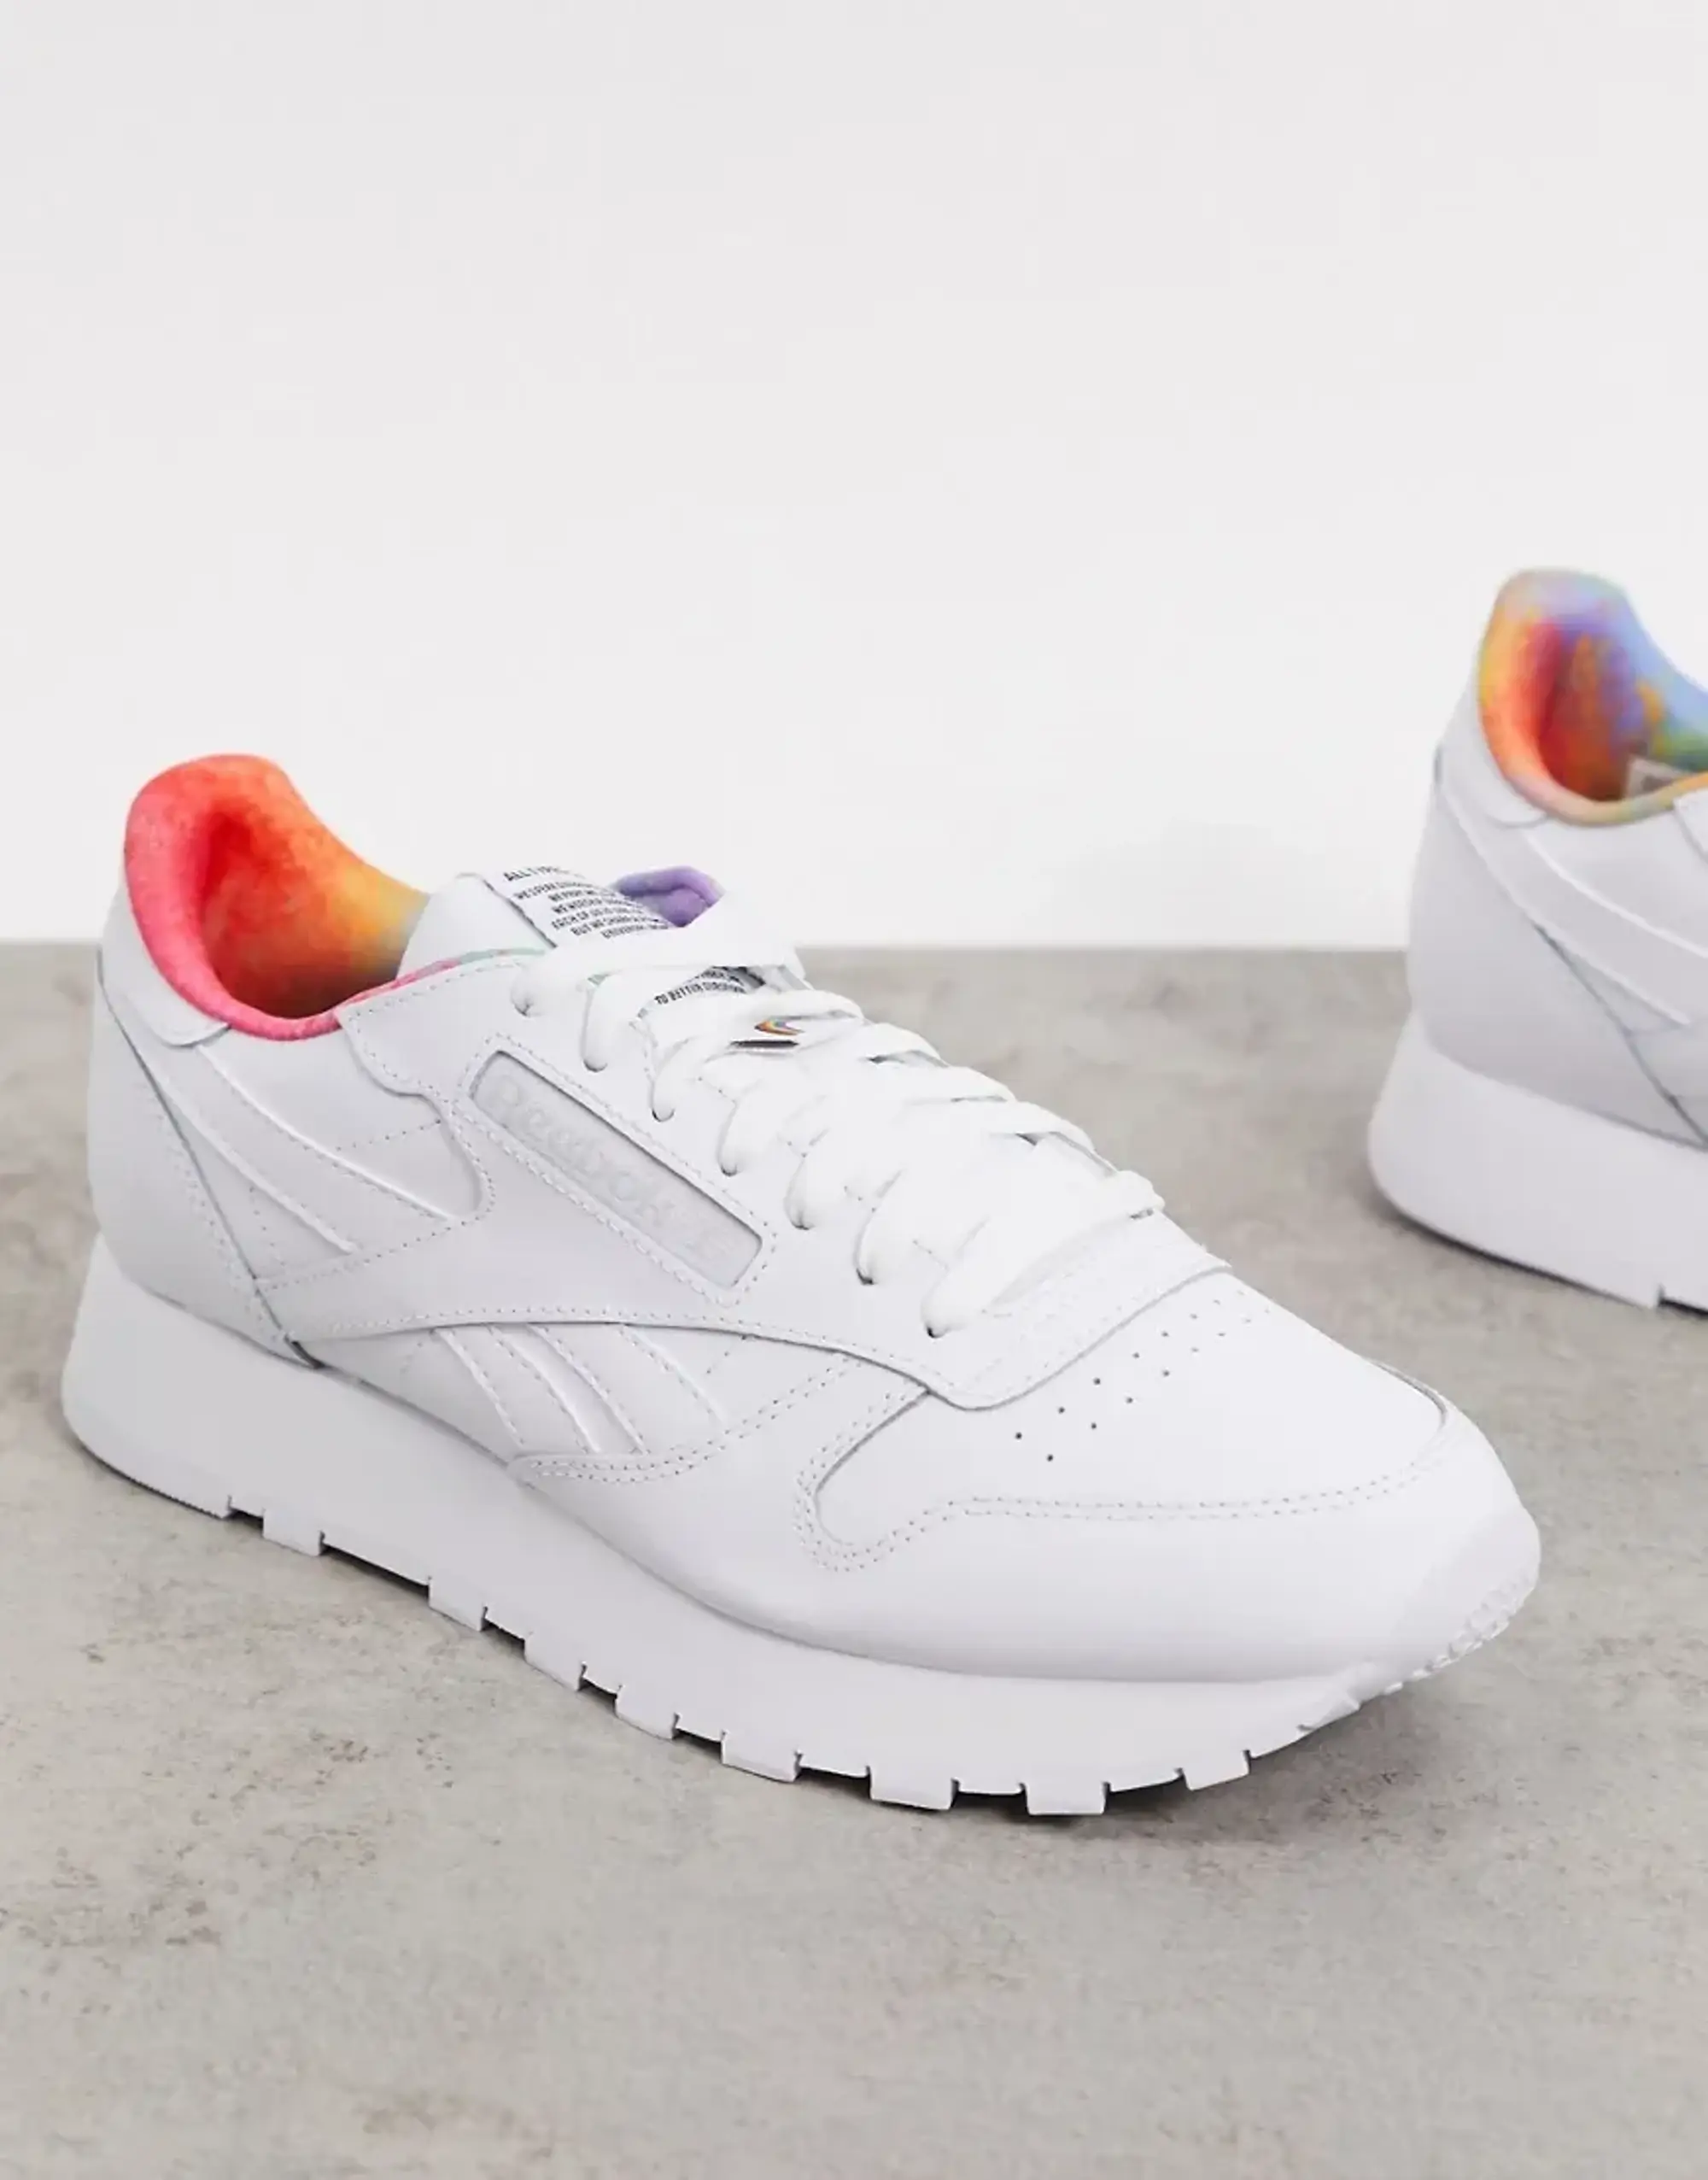 Reebok Pride Classic Leather trainers in white